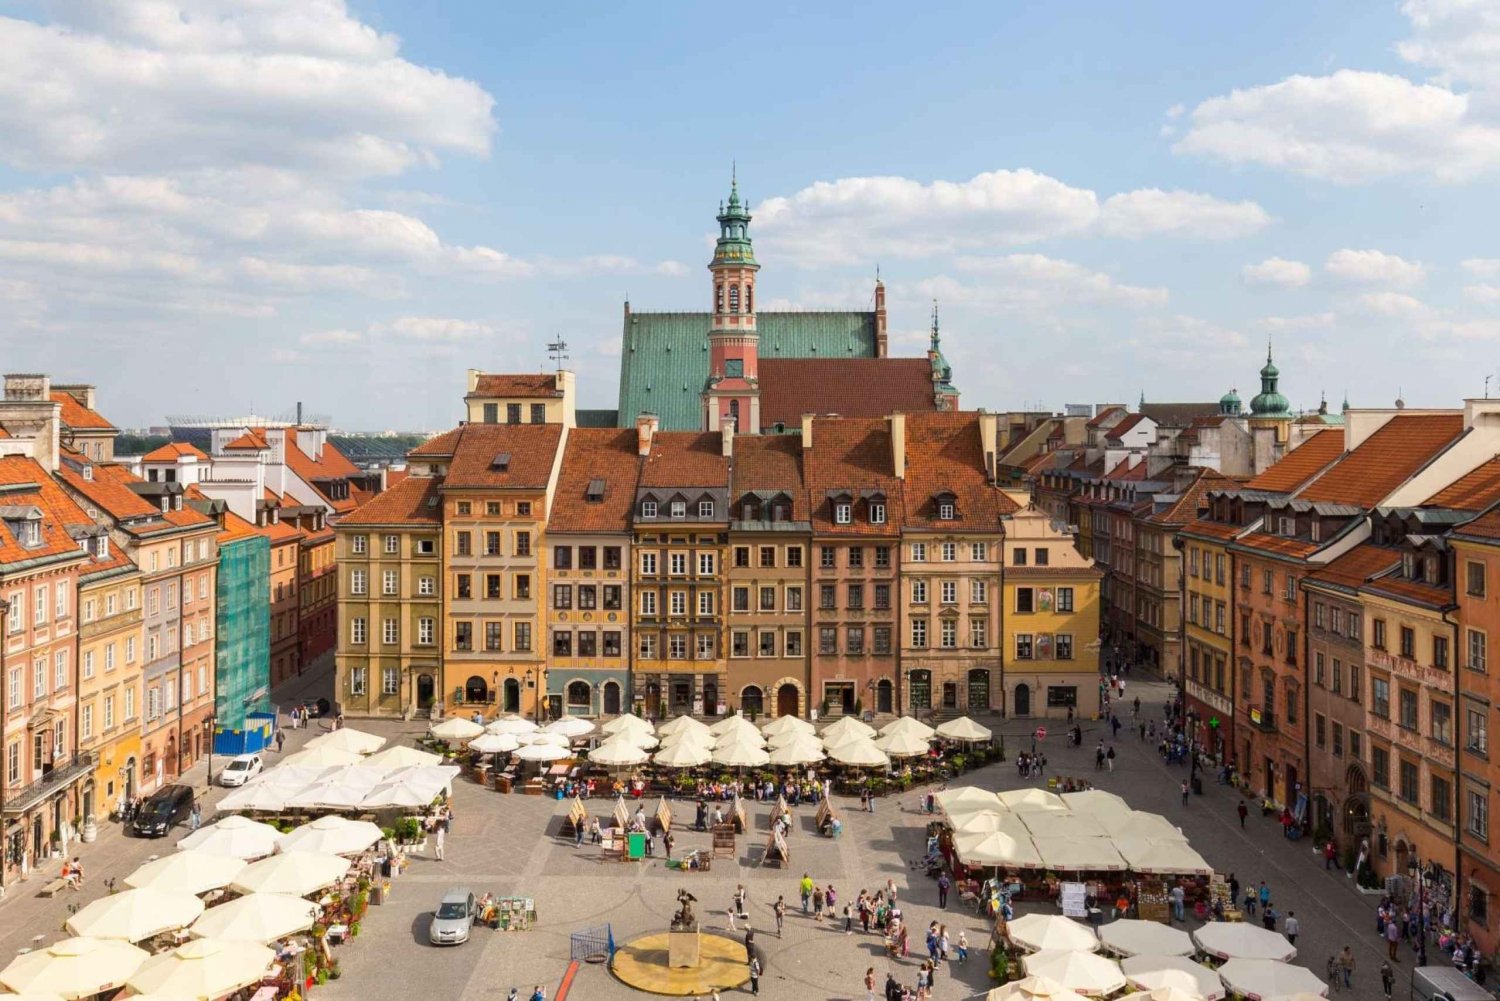 Exploring-the-Warsaw-Old-Town-Christmas-Market